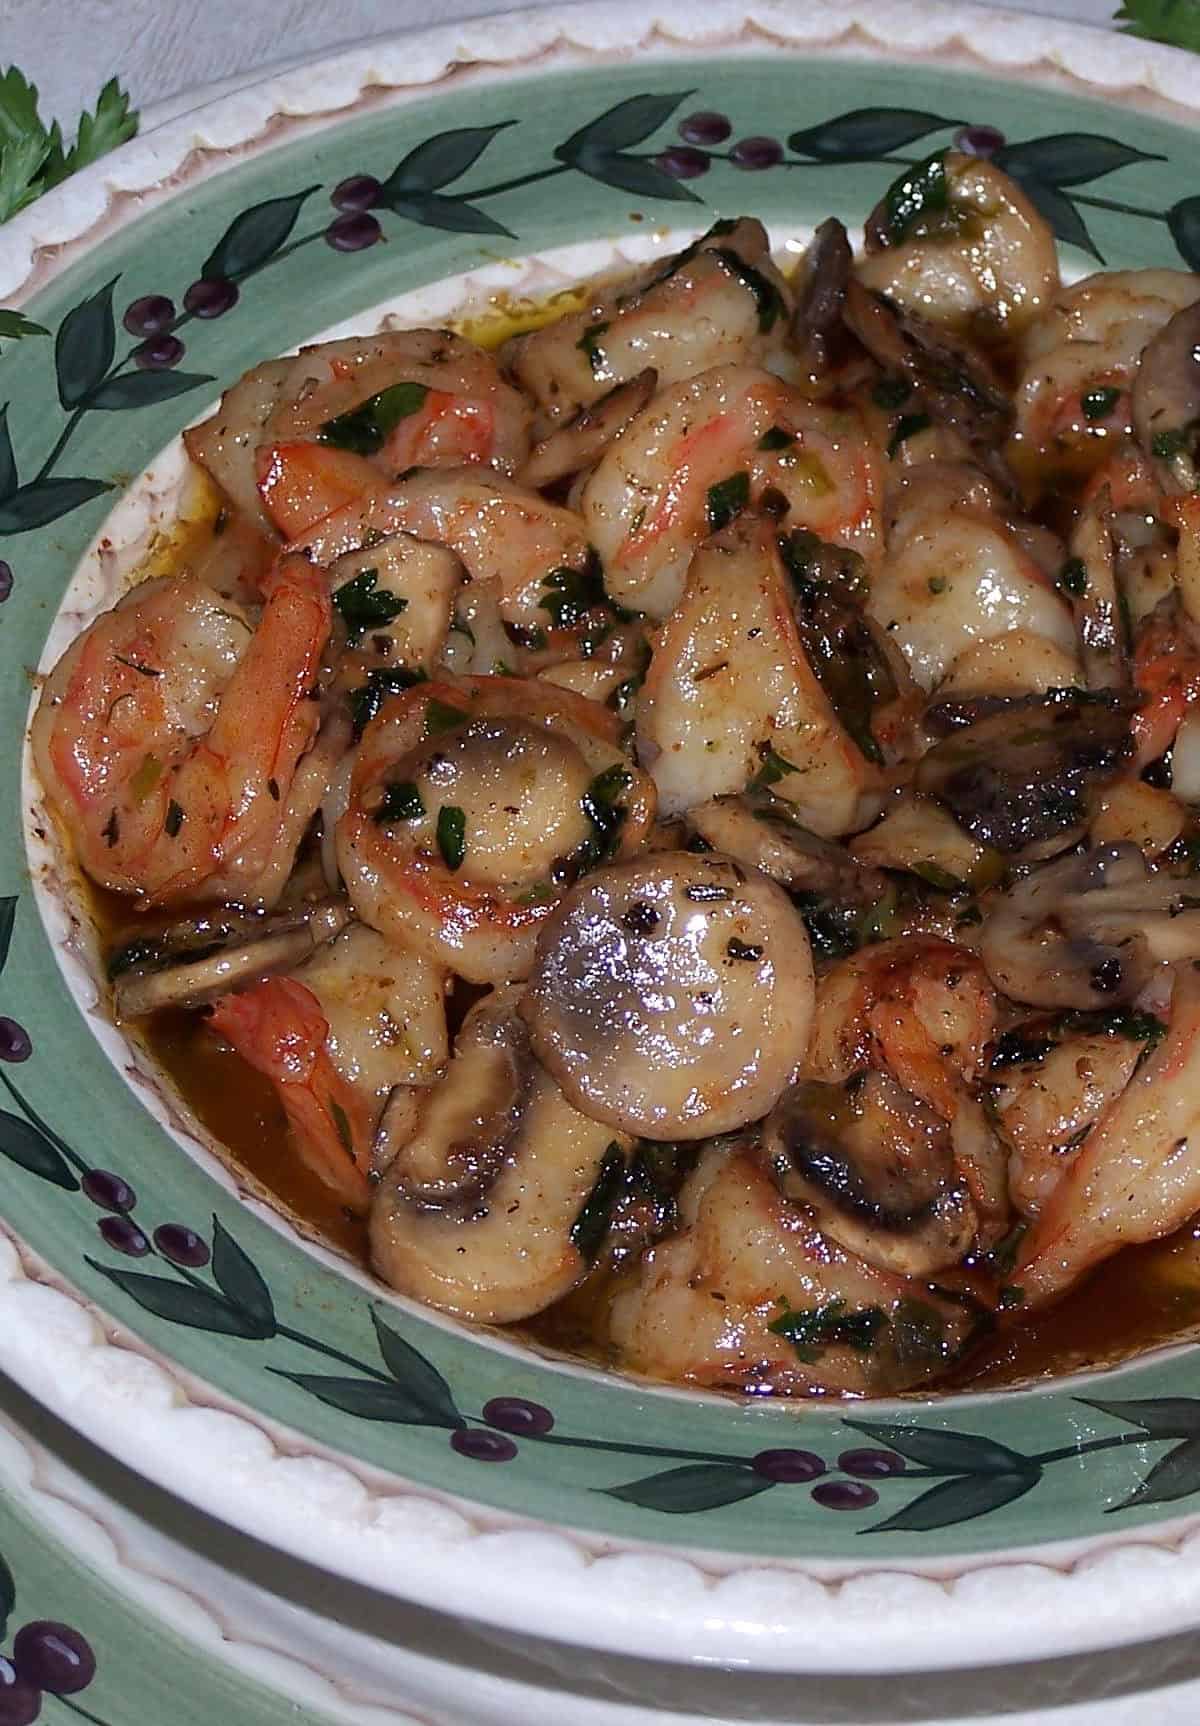  Get ready to impress your guests with Shrimp Diane!